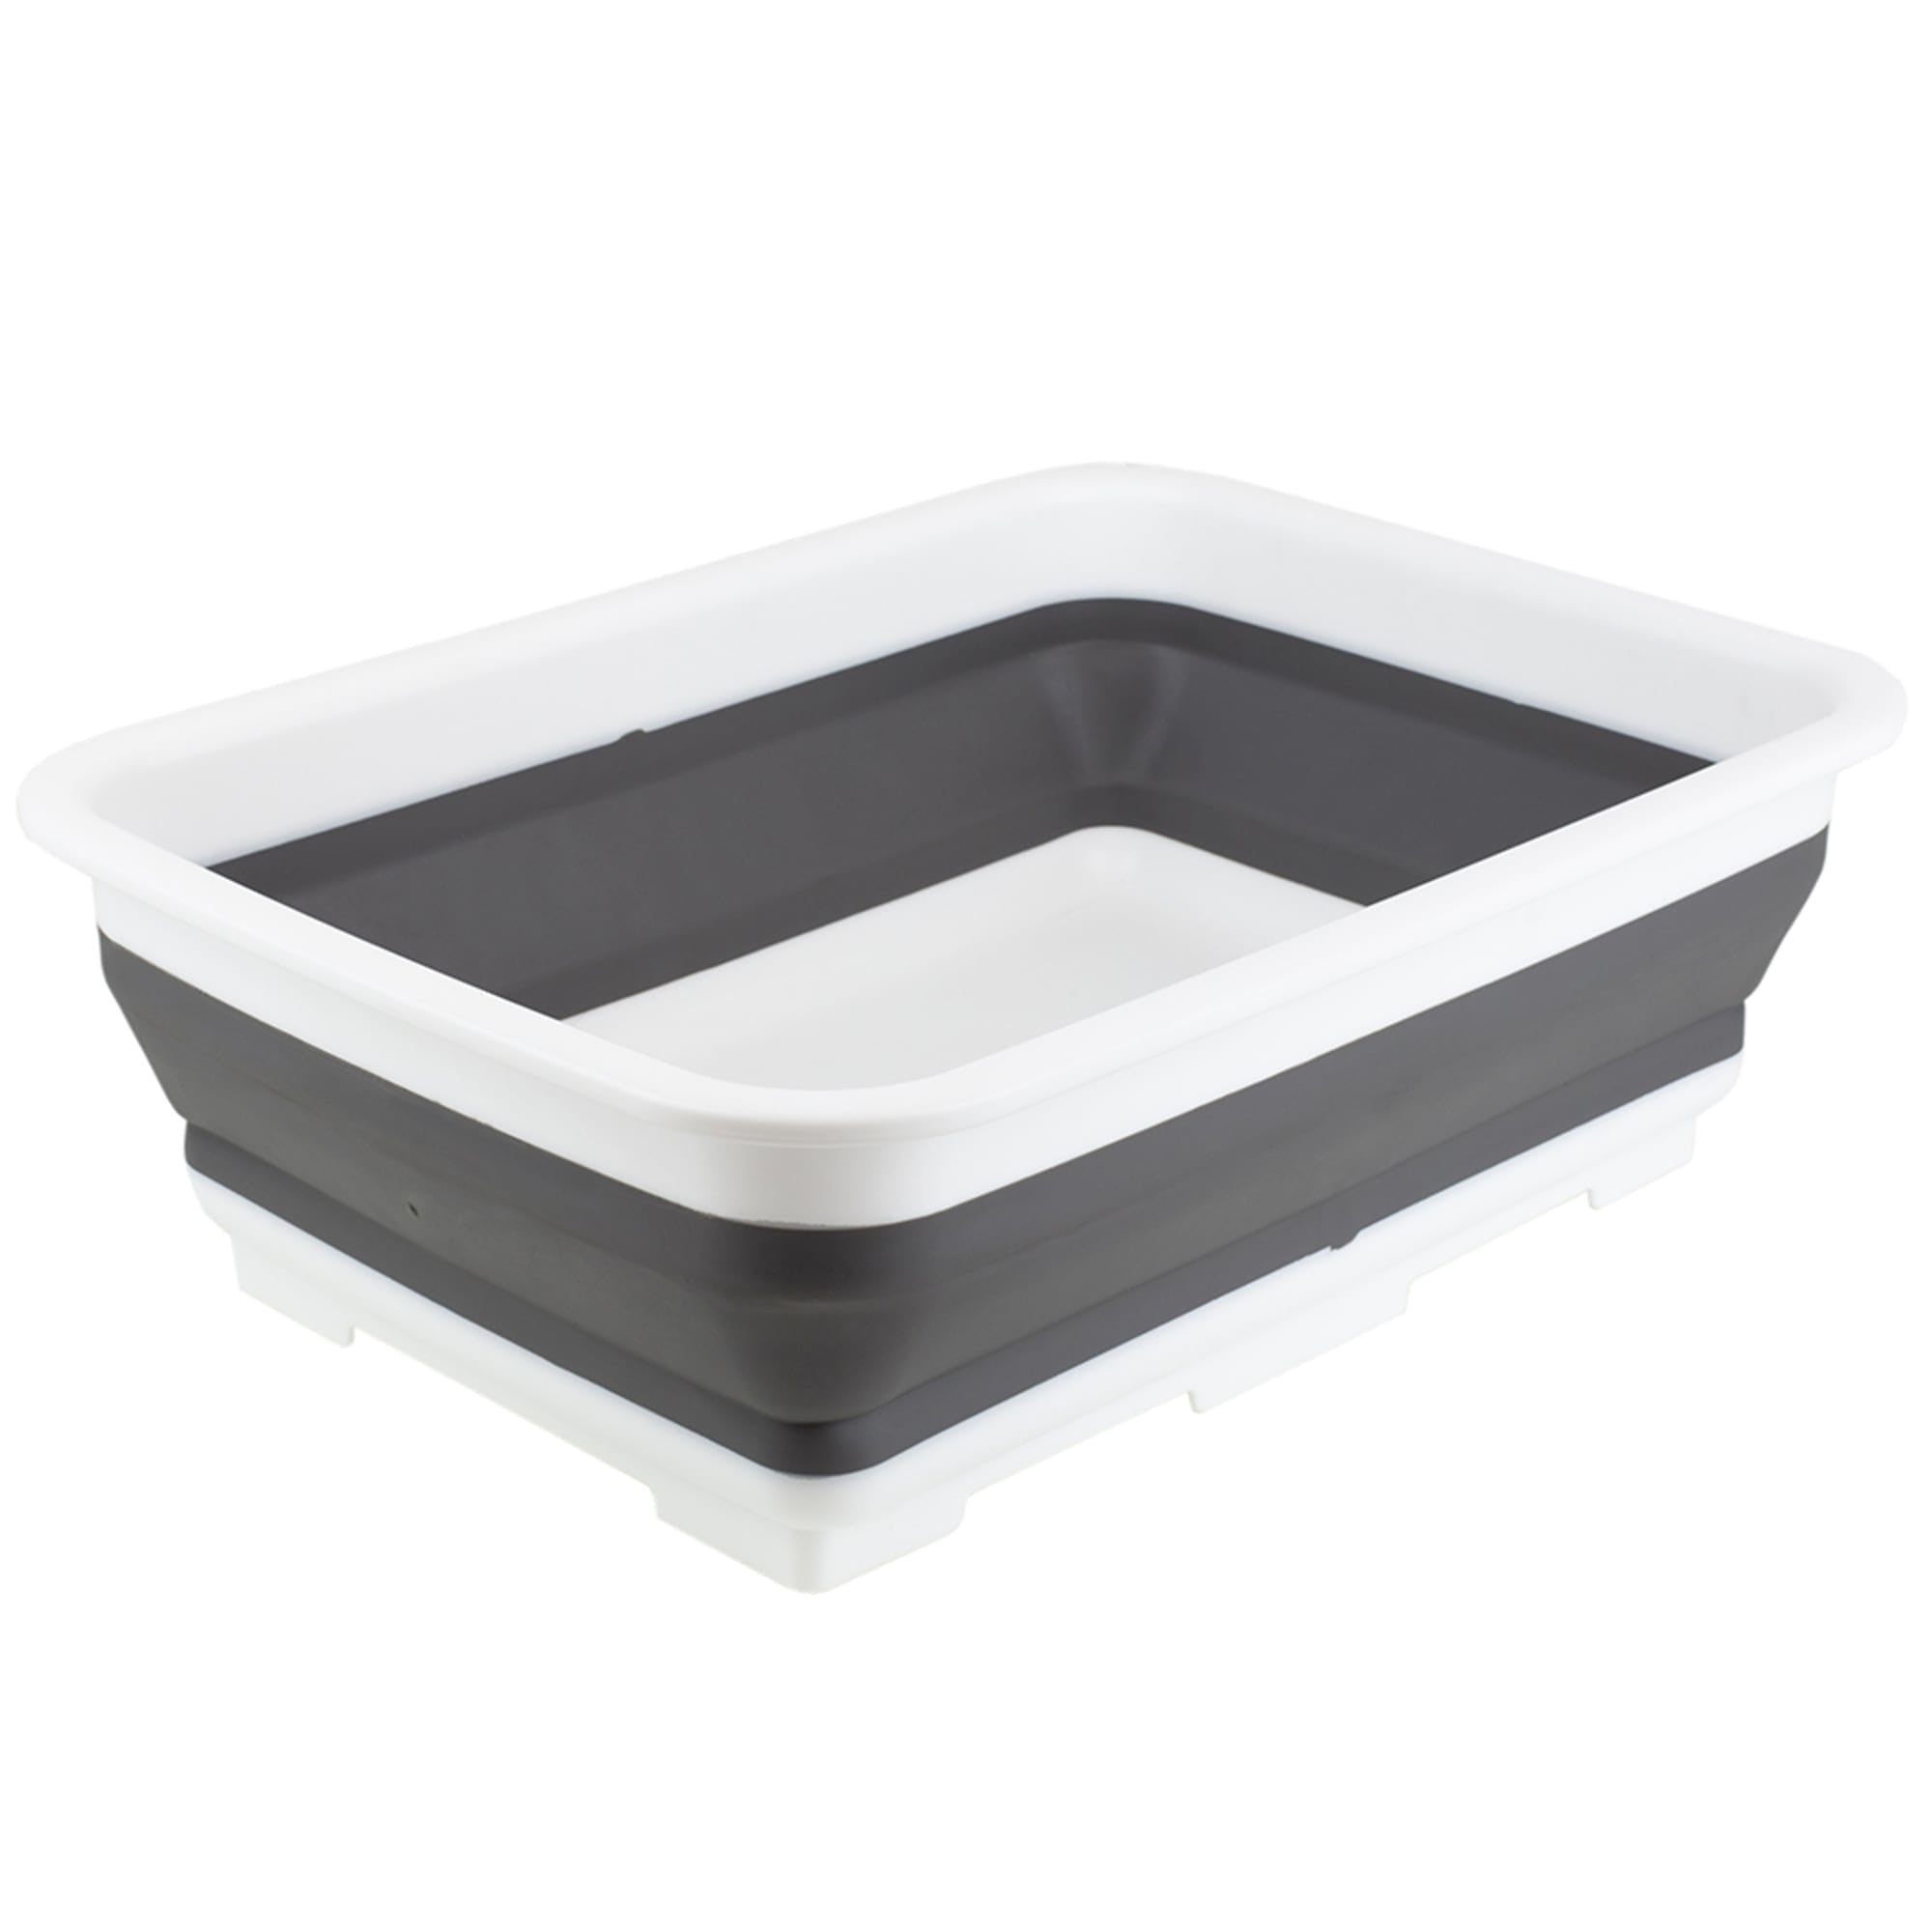 Michael Graves Design Pop Up Collapsible White Plastic and Grey Silicone Dish Pan $6.00 EACH, CASE PACK OF 12